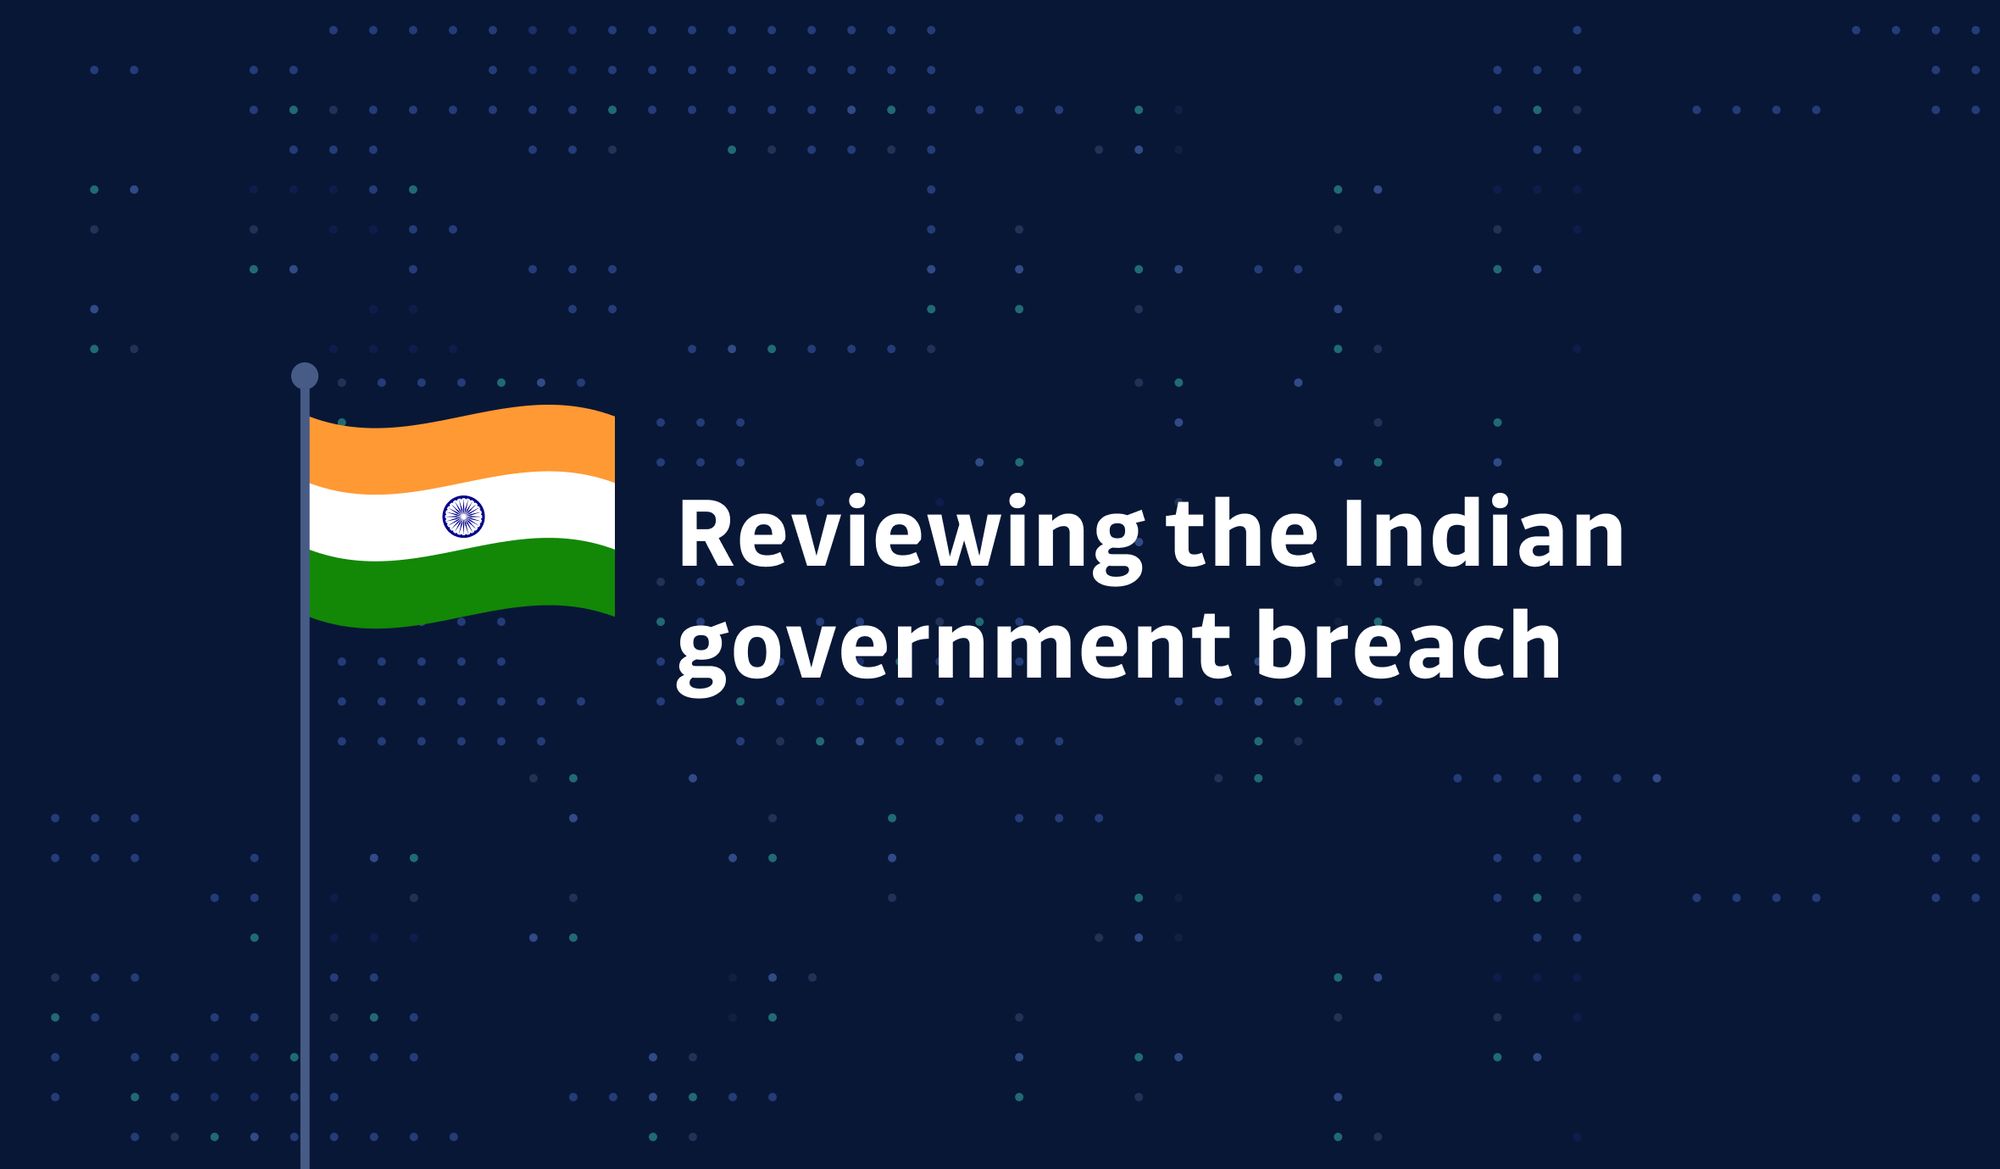 Analyzing how hackers breached the Indian government - play by play